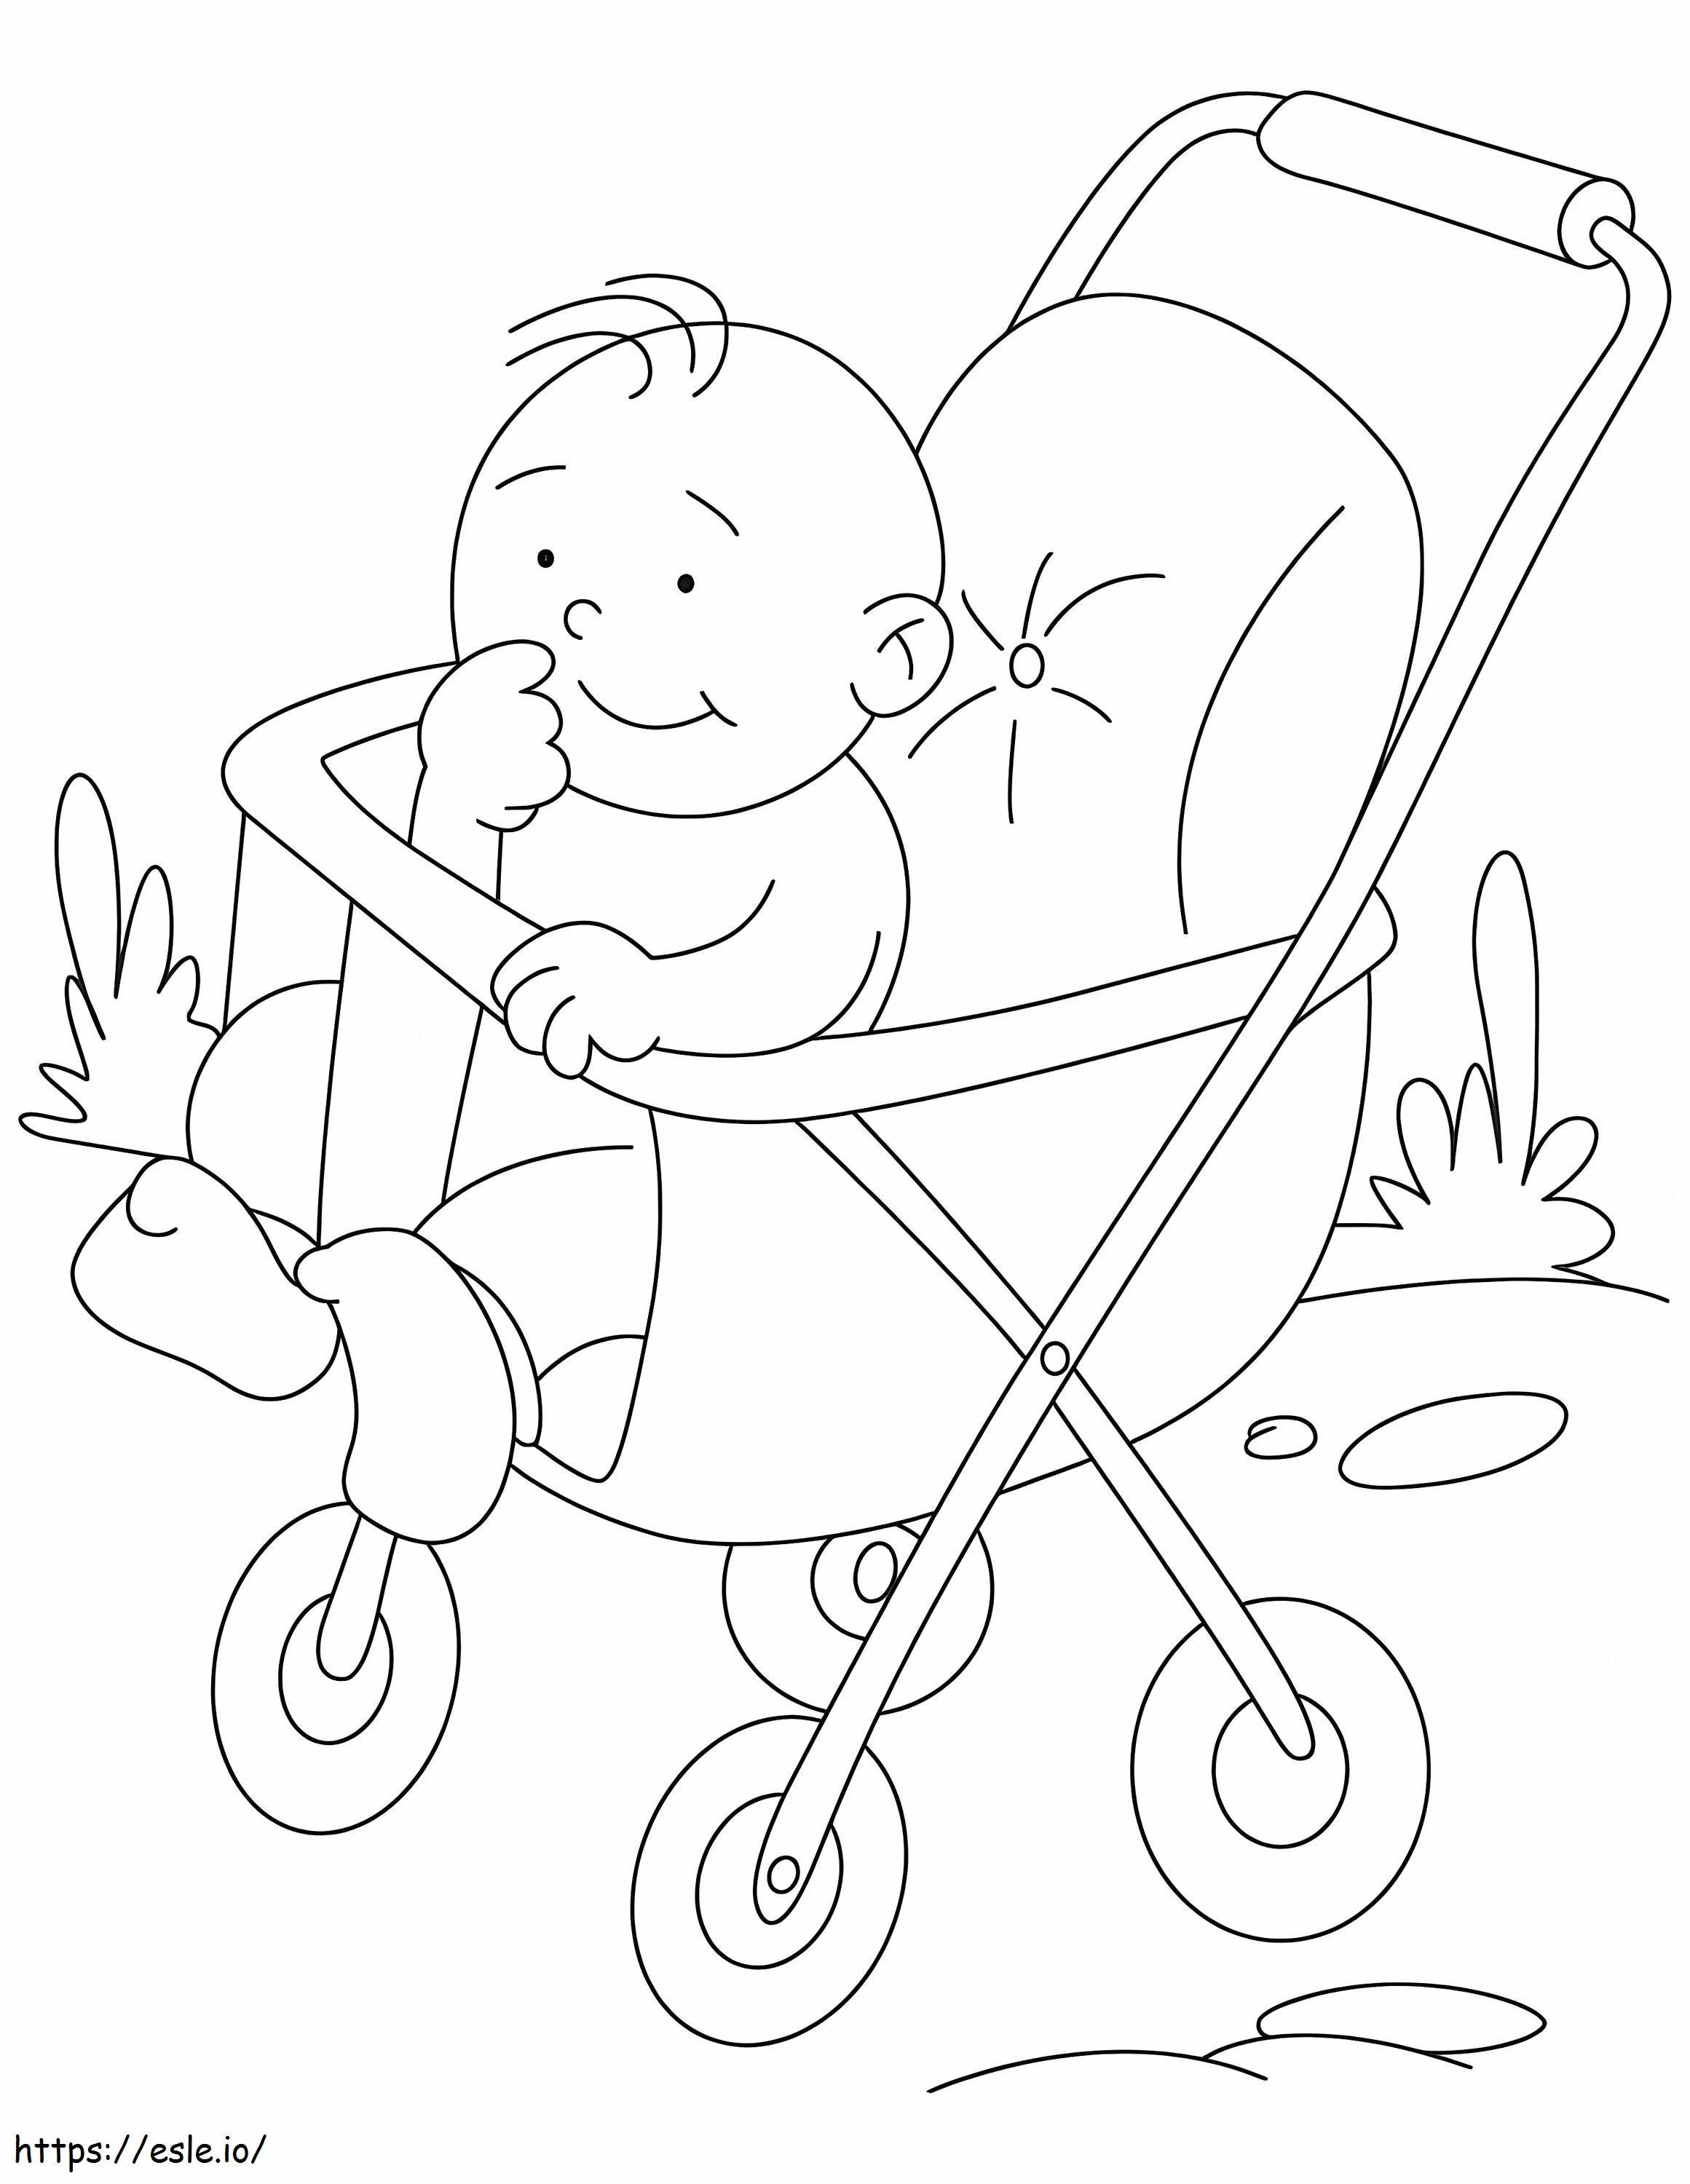 Little Boy In Stroller Coloring Page coloring page